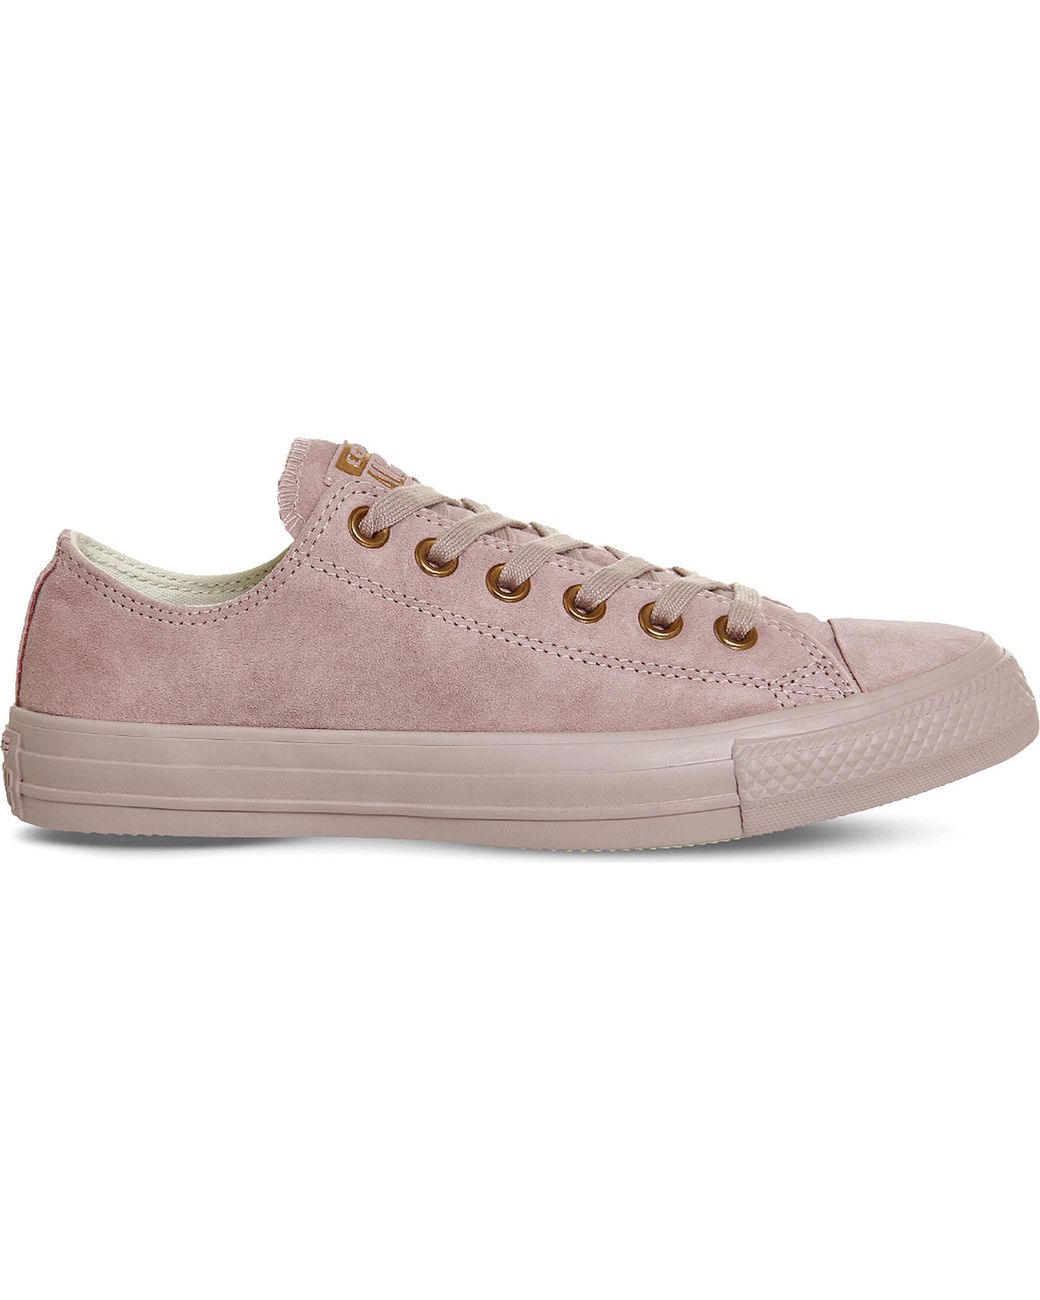 Converse All Star Suede Low-Top Sneakers in Pink | Lyst